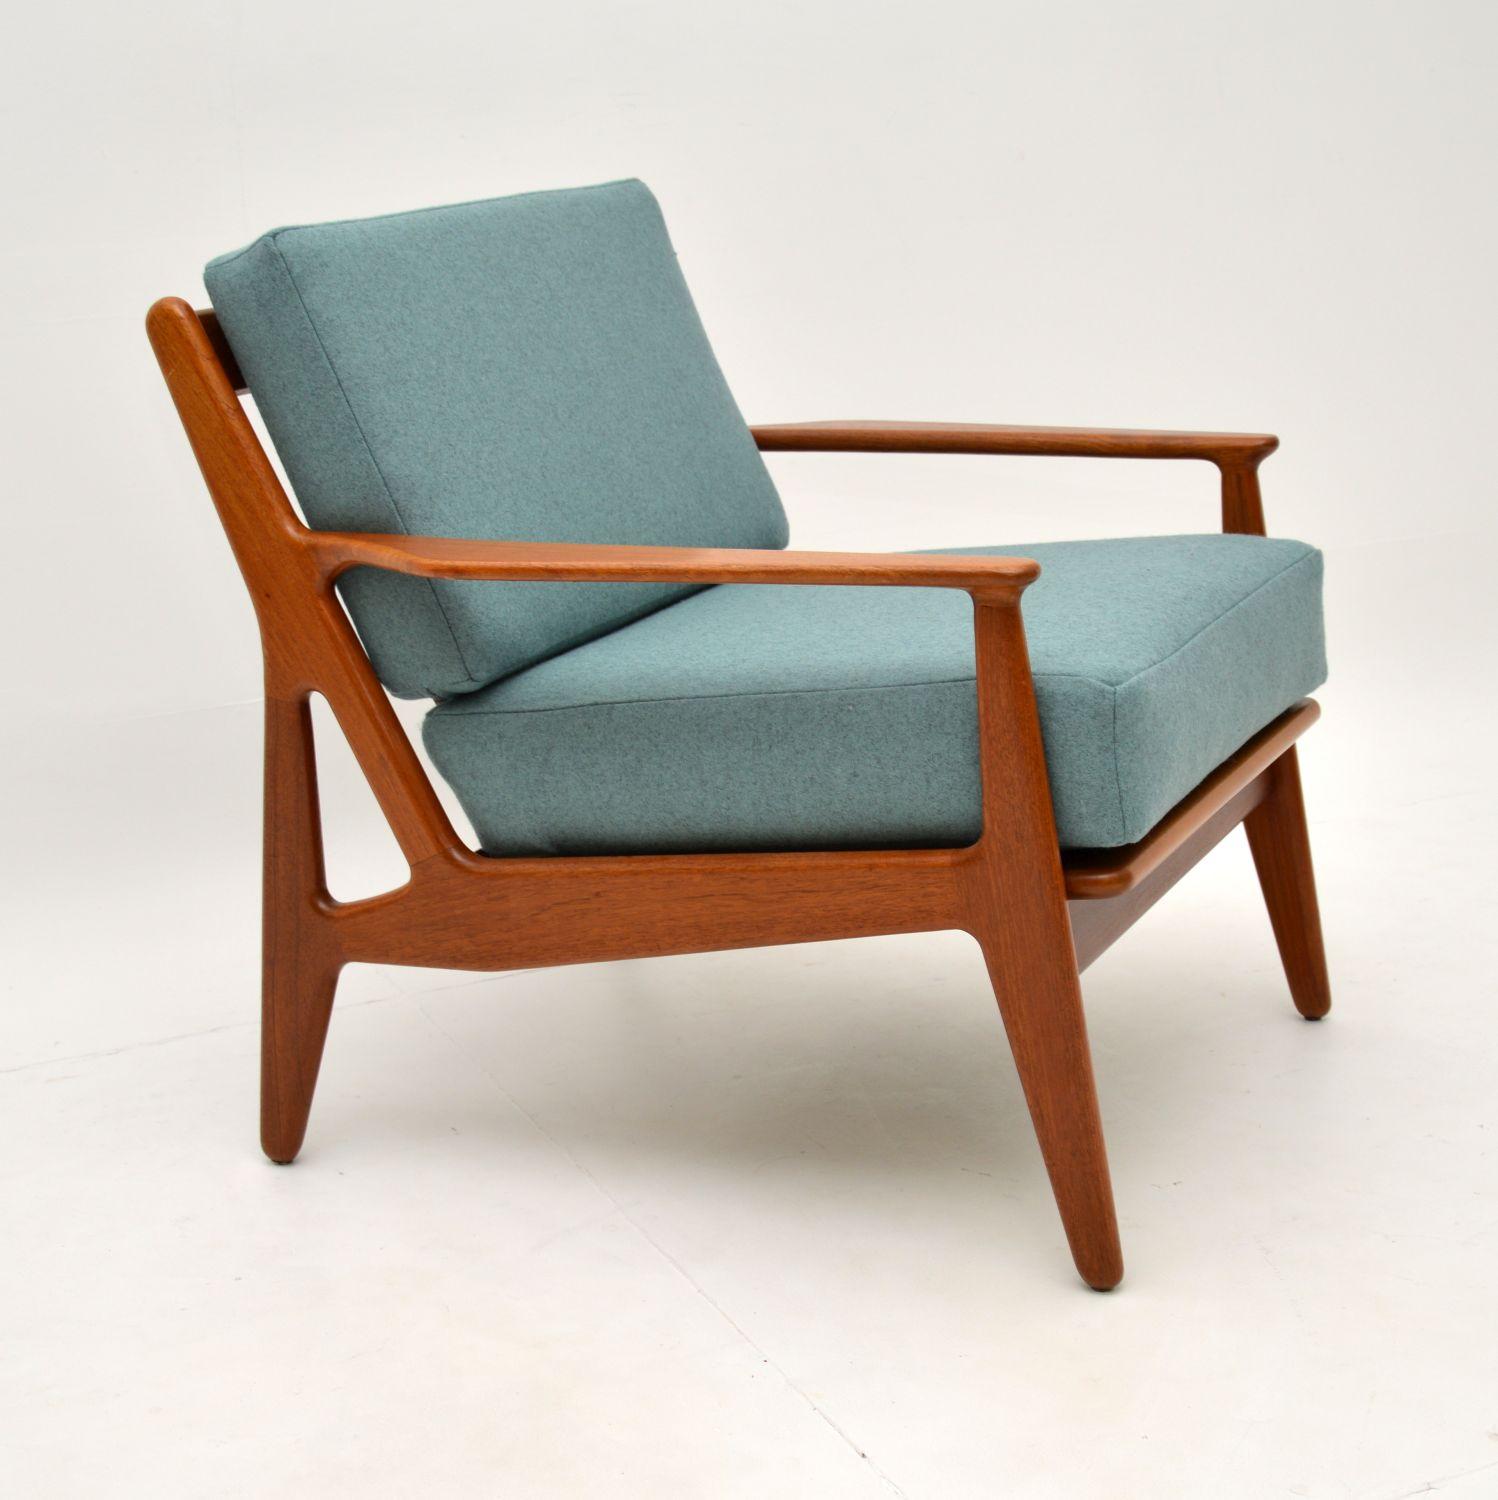 A stunning and rare Danish vintage armchair in solid teak. This was designed by Arne Vodder, it dates from the 1960’s.

We have had this fully restored, it is in amazing condition and is very comfortable.

The teak frame has been stripped and